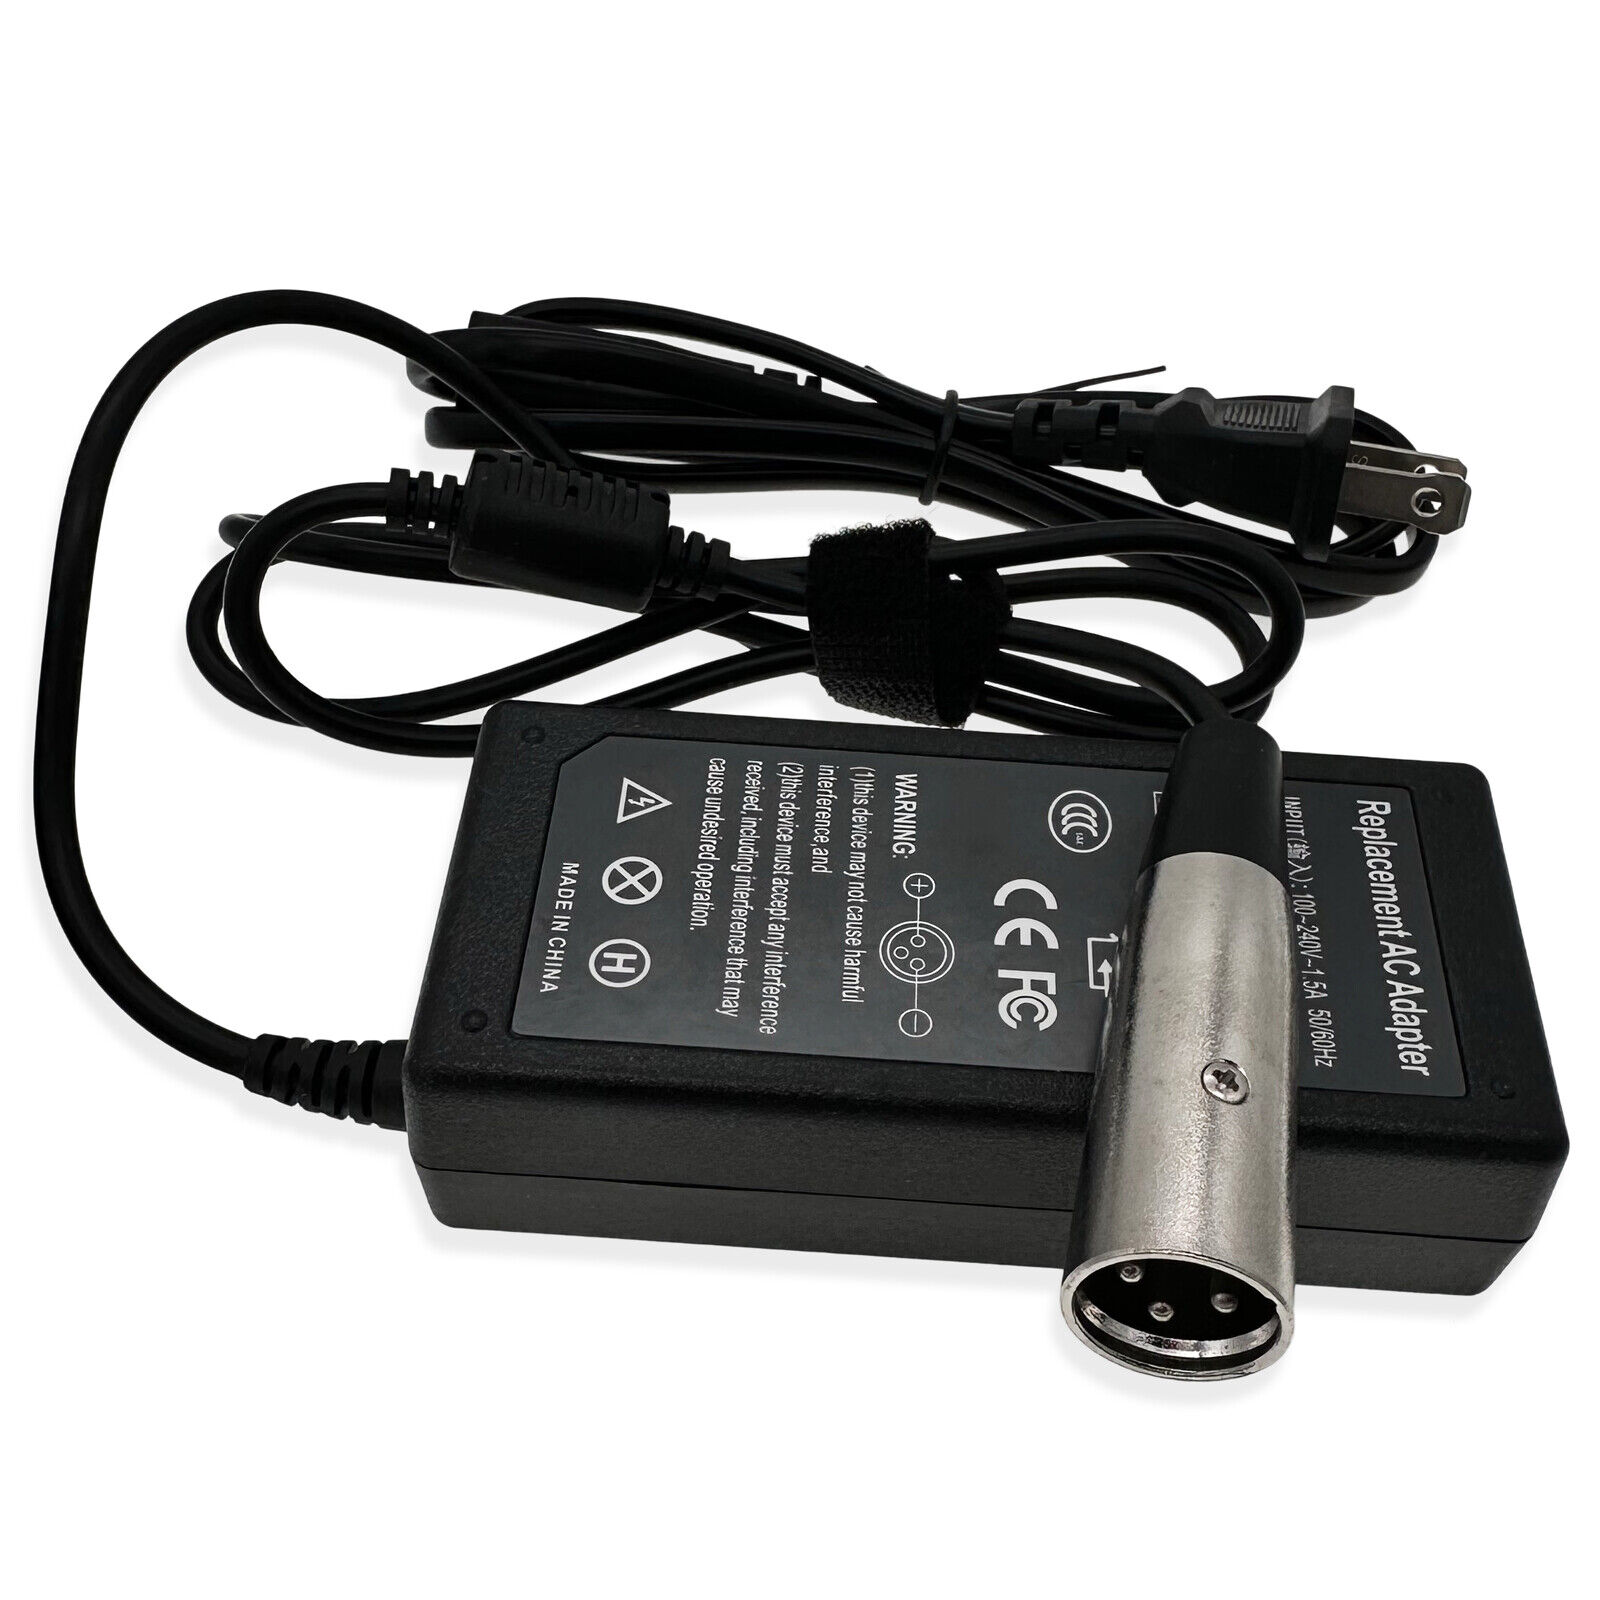 24V 2A 48W New Electric Scooter Power Chair Battery Charger for Amigo MC MCX US 24V 2A 48W New Electric Scooter Power C - Click Image to Close